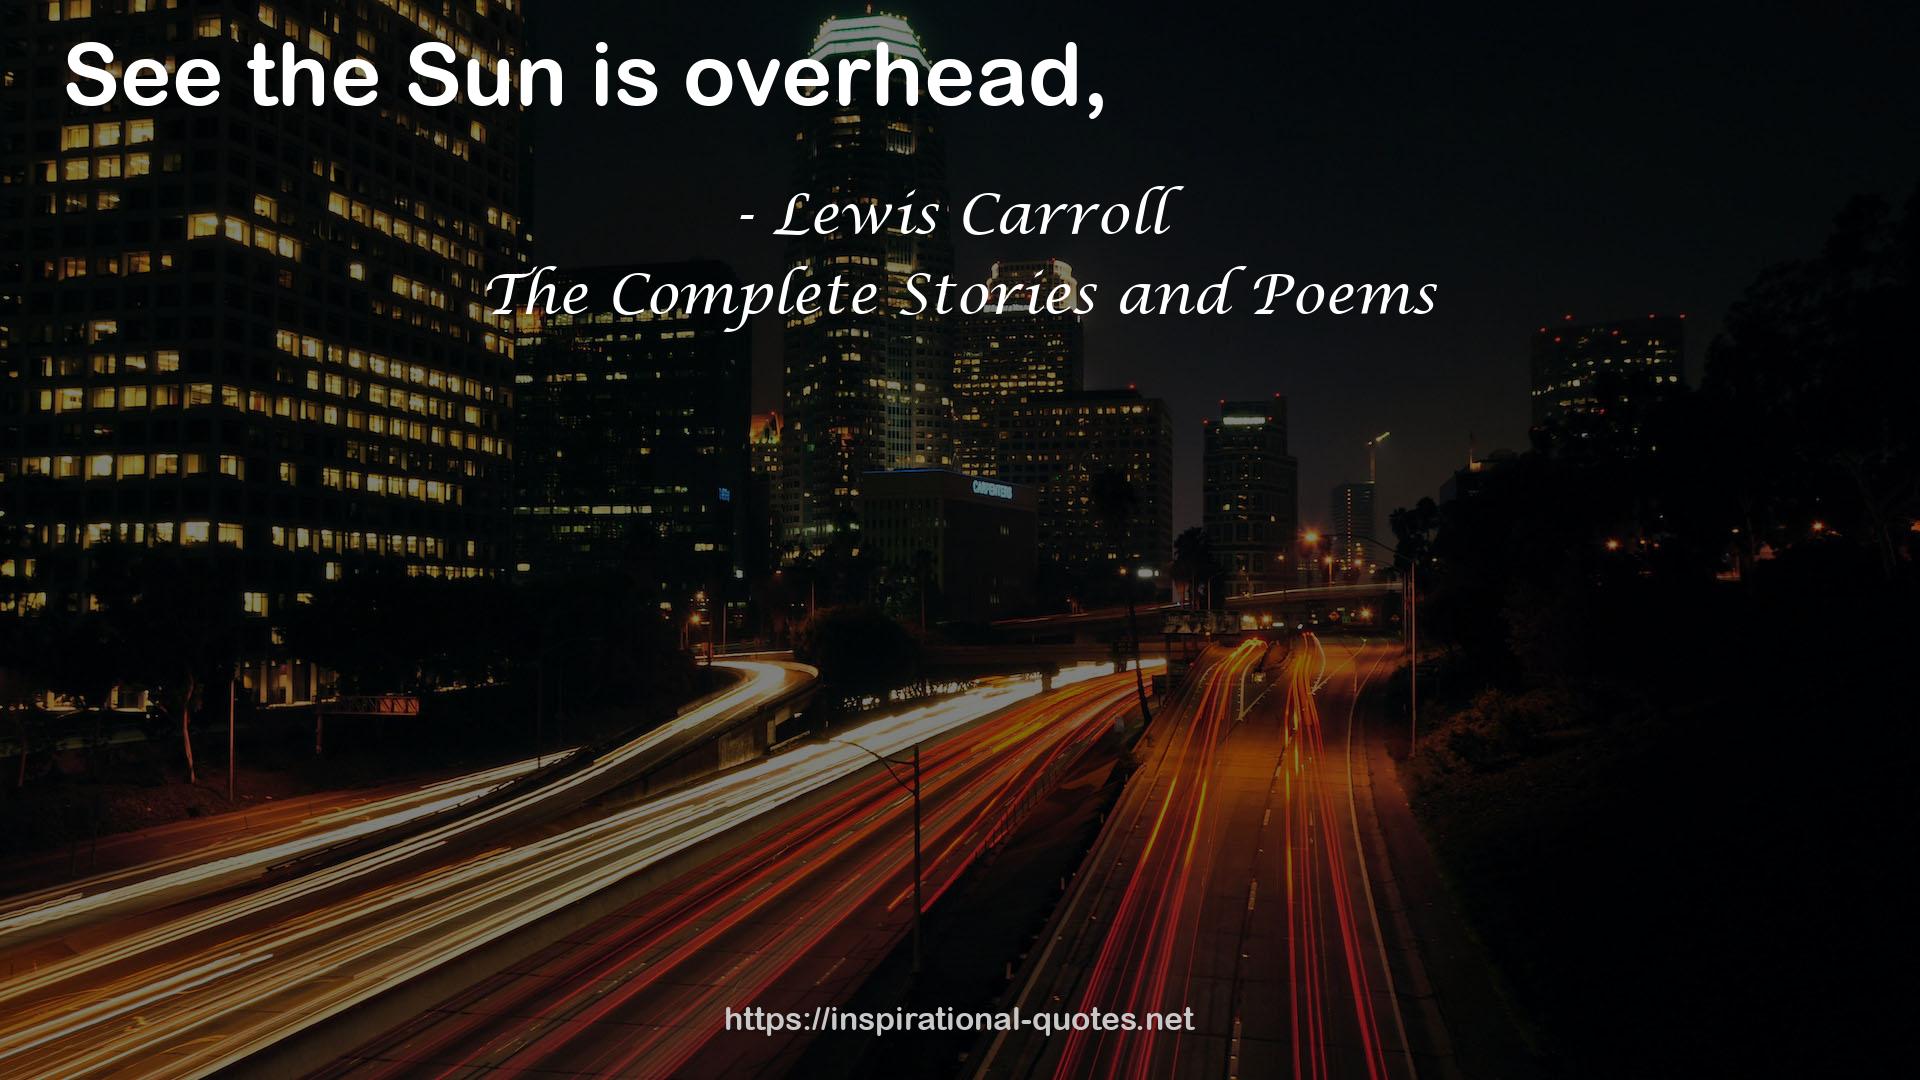 The Complete Stories and Poems QUOTES